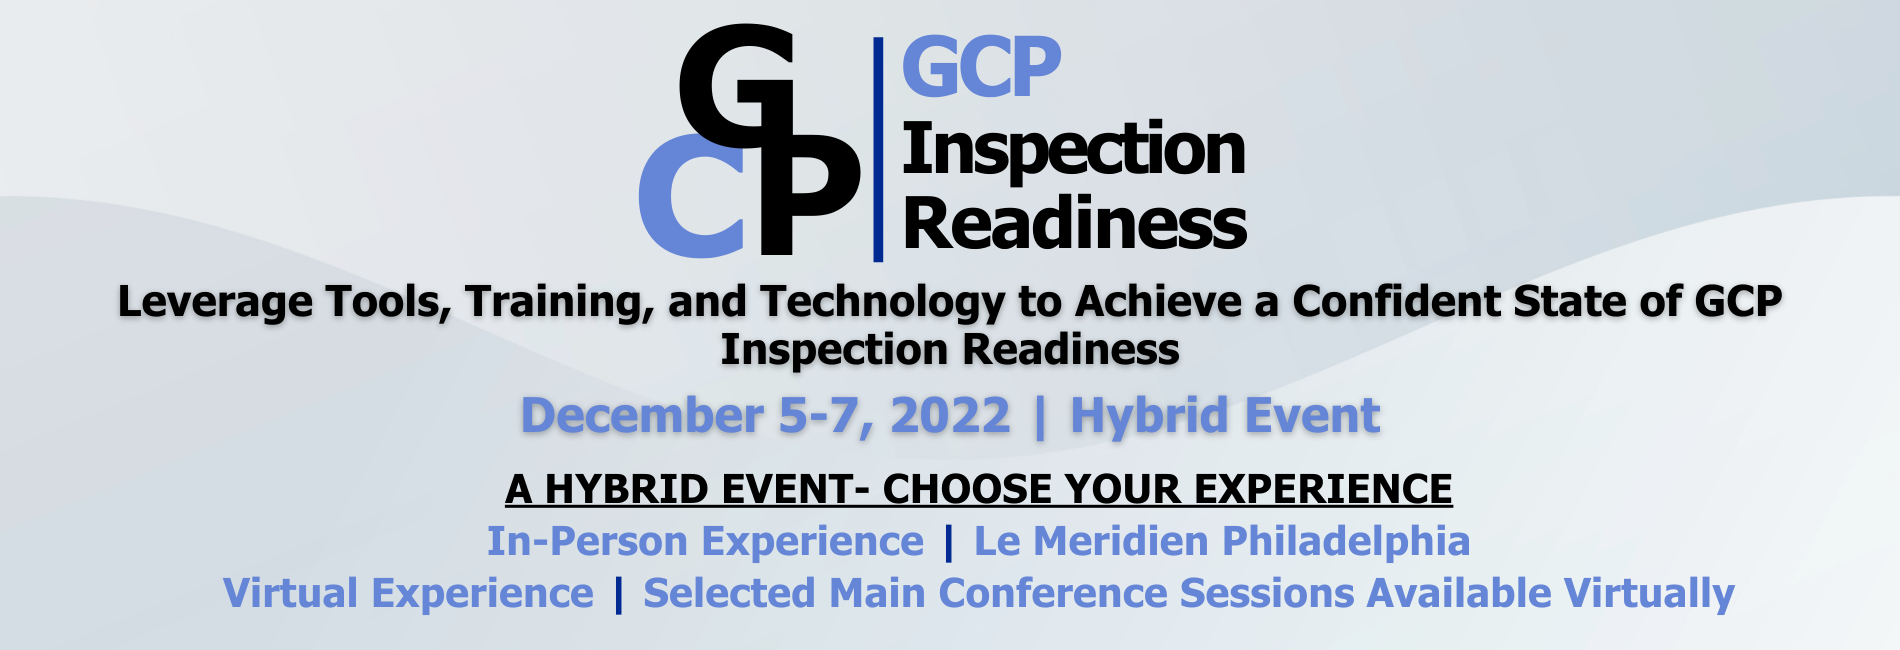 GCP Inspection Readiness